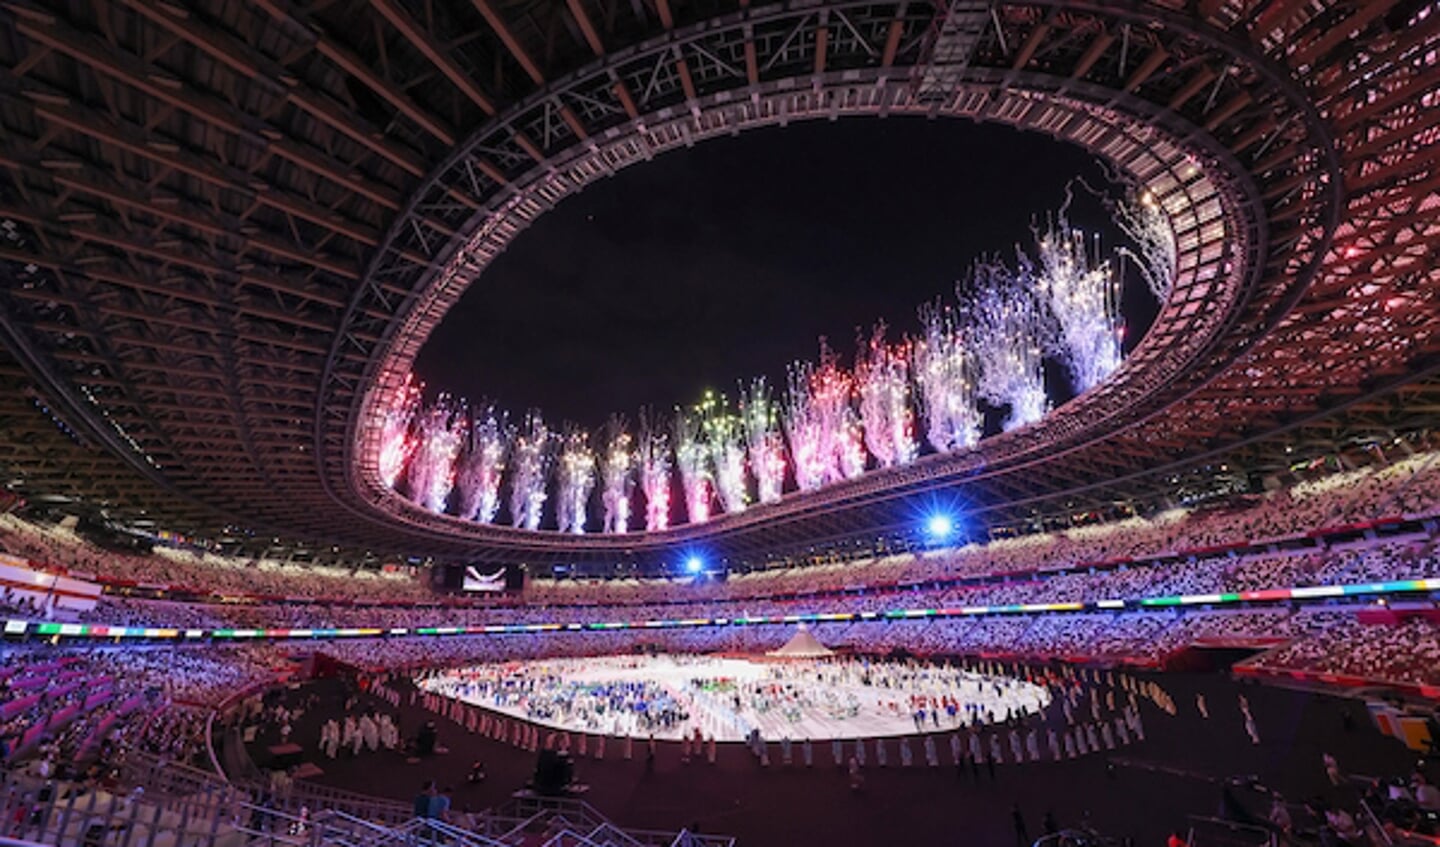 Opening Ceremony
Olympic Games Tokyo 2021
© Hippo Foto - Dirk Caremans
23/07/2021